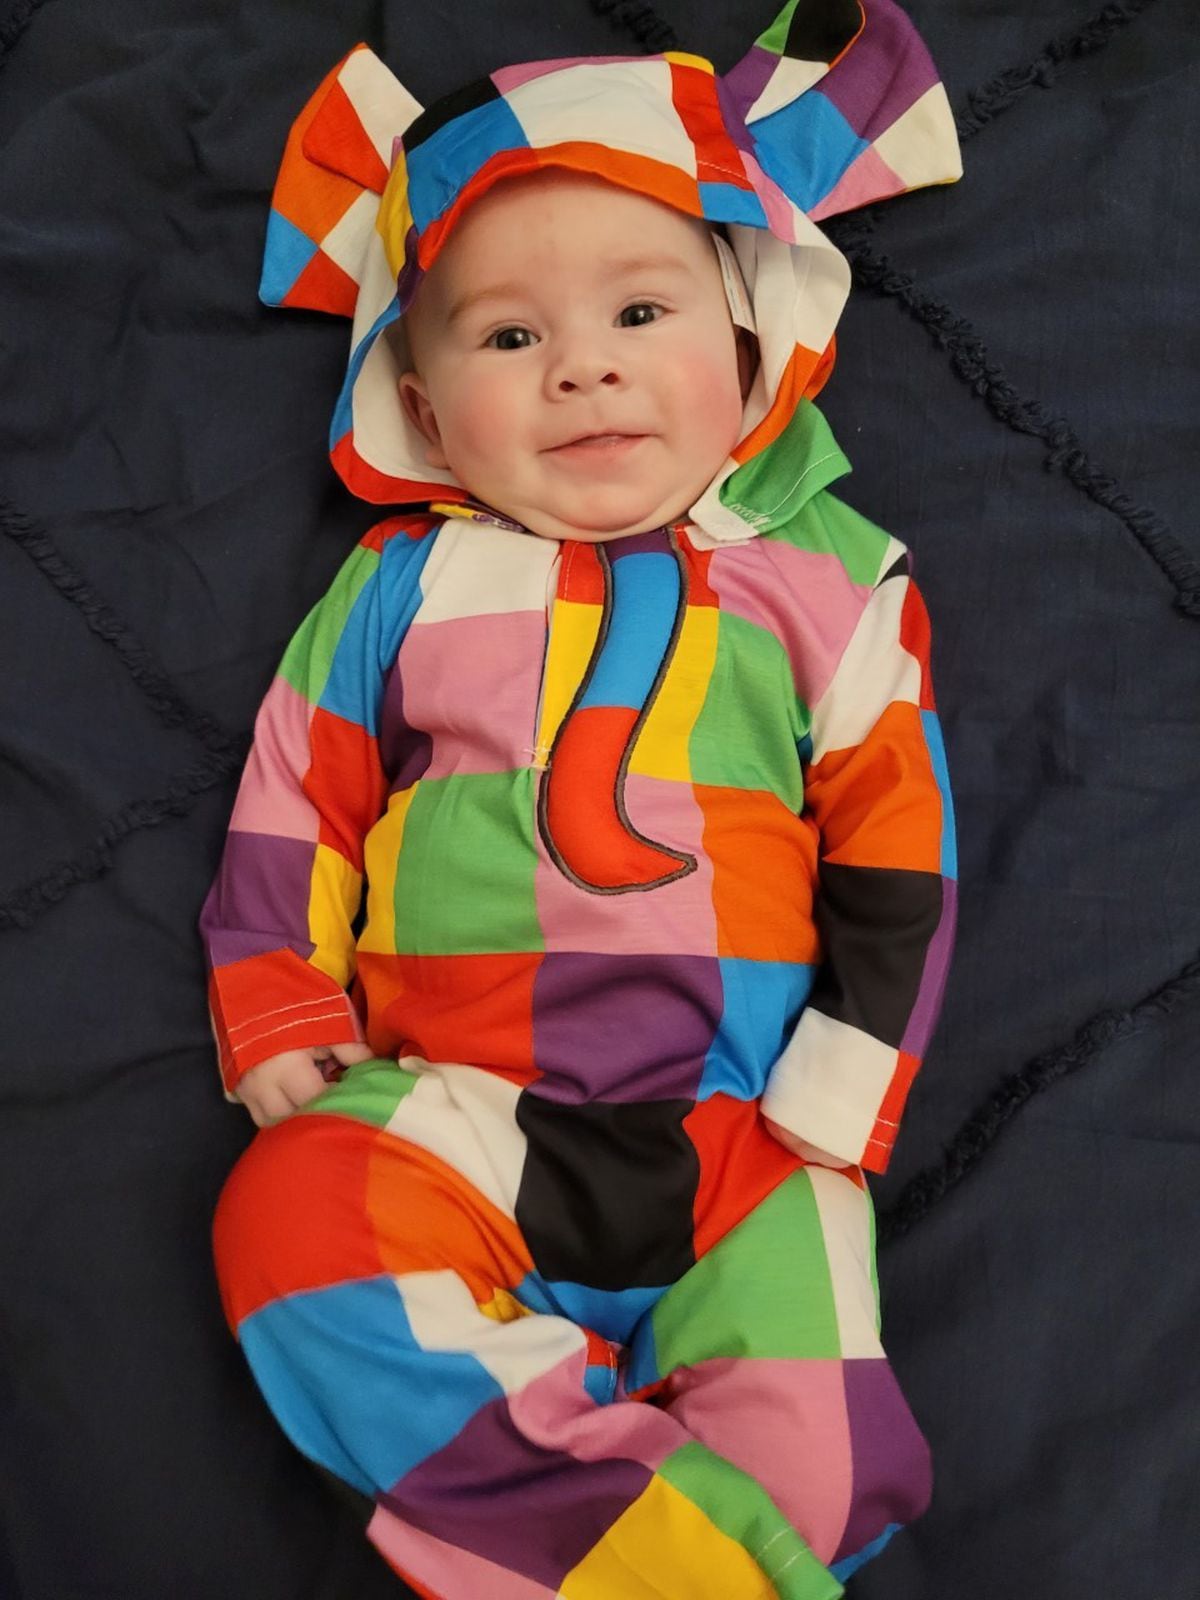 Elmer the Patchwork Elephant as a baby! Grace Williams, four months old.